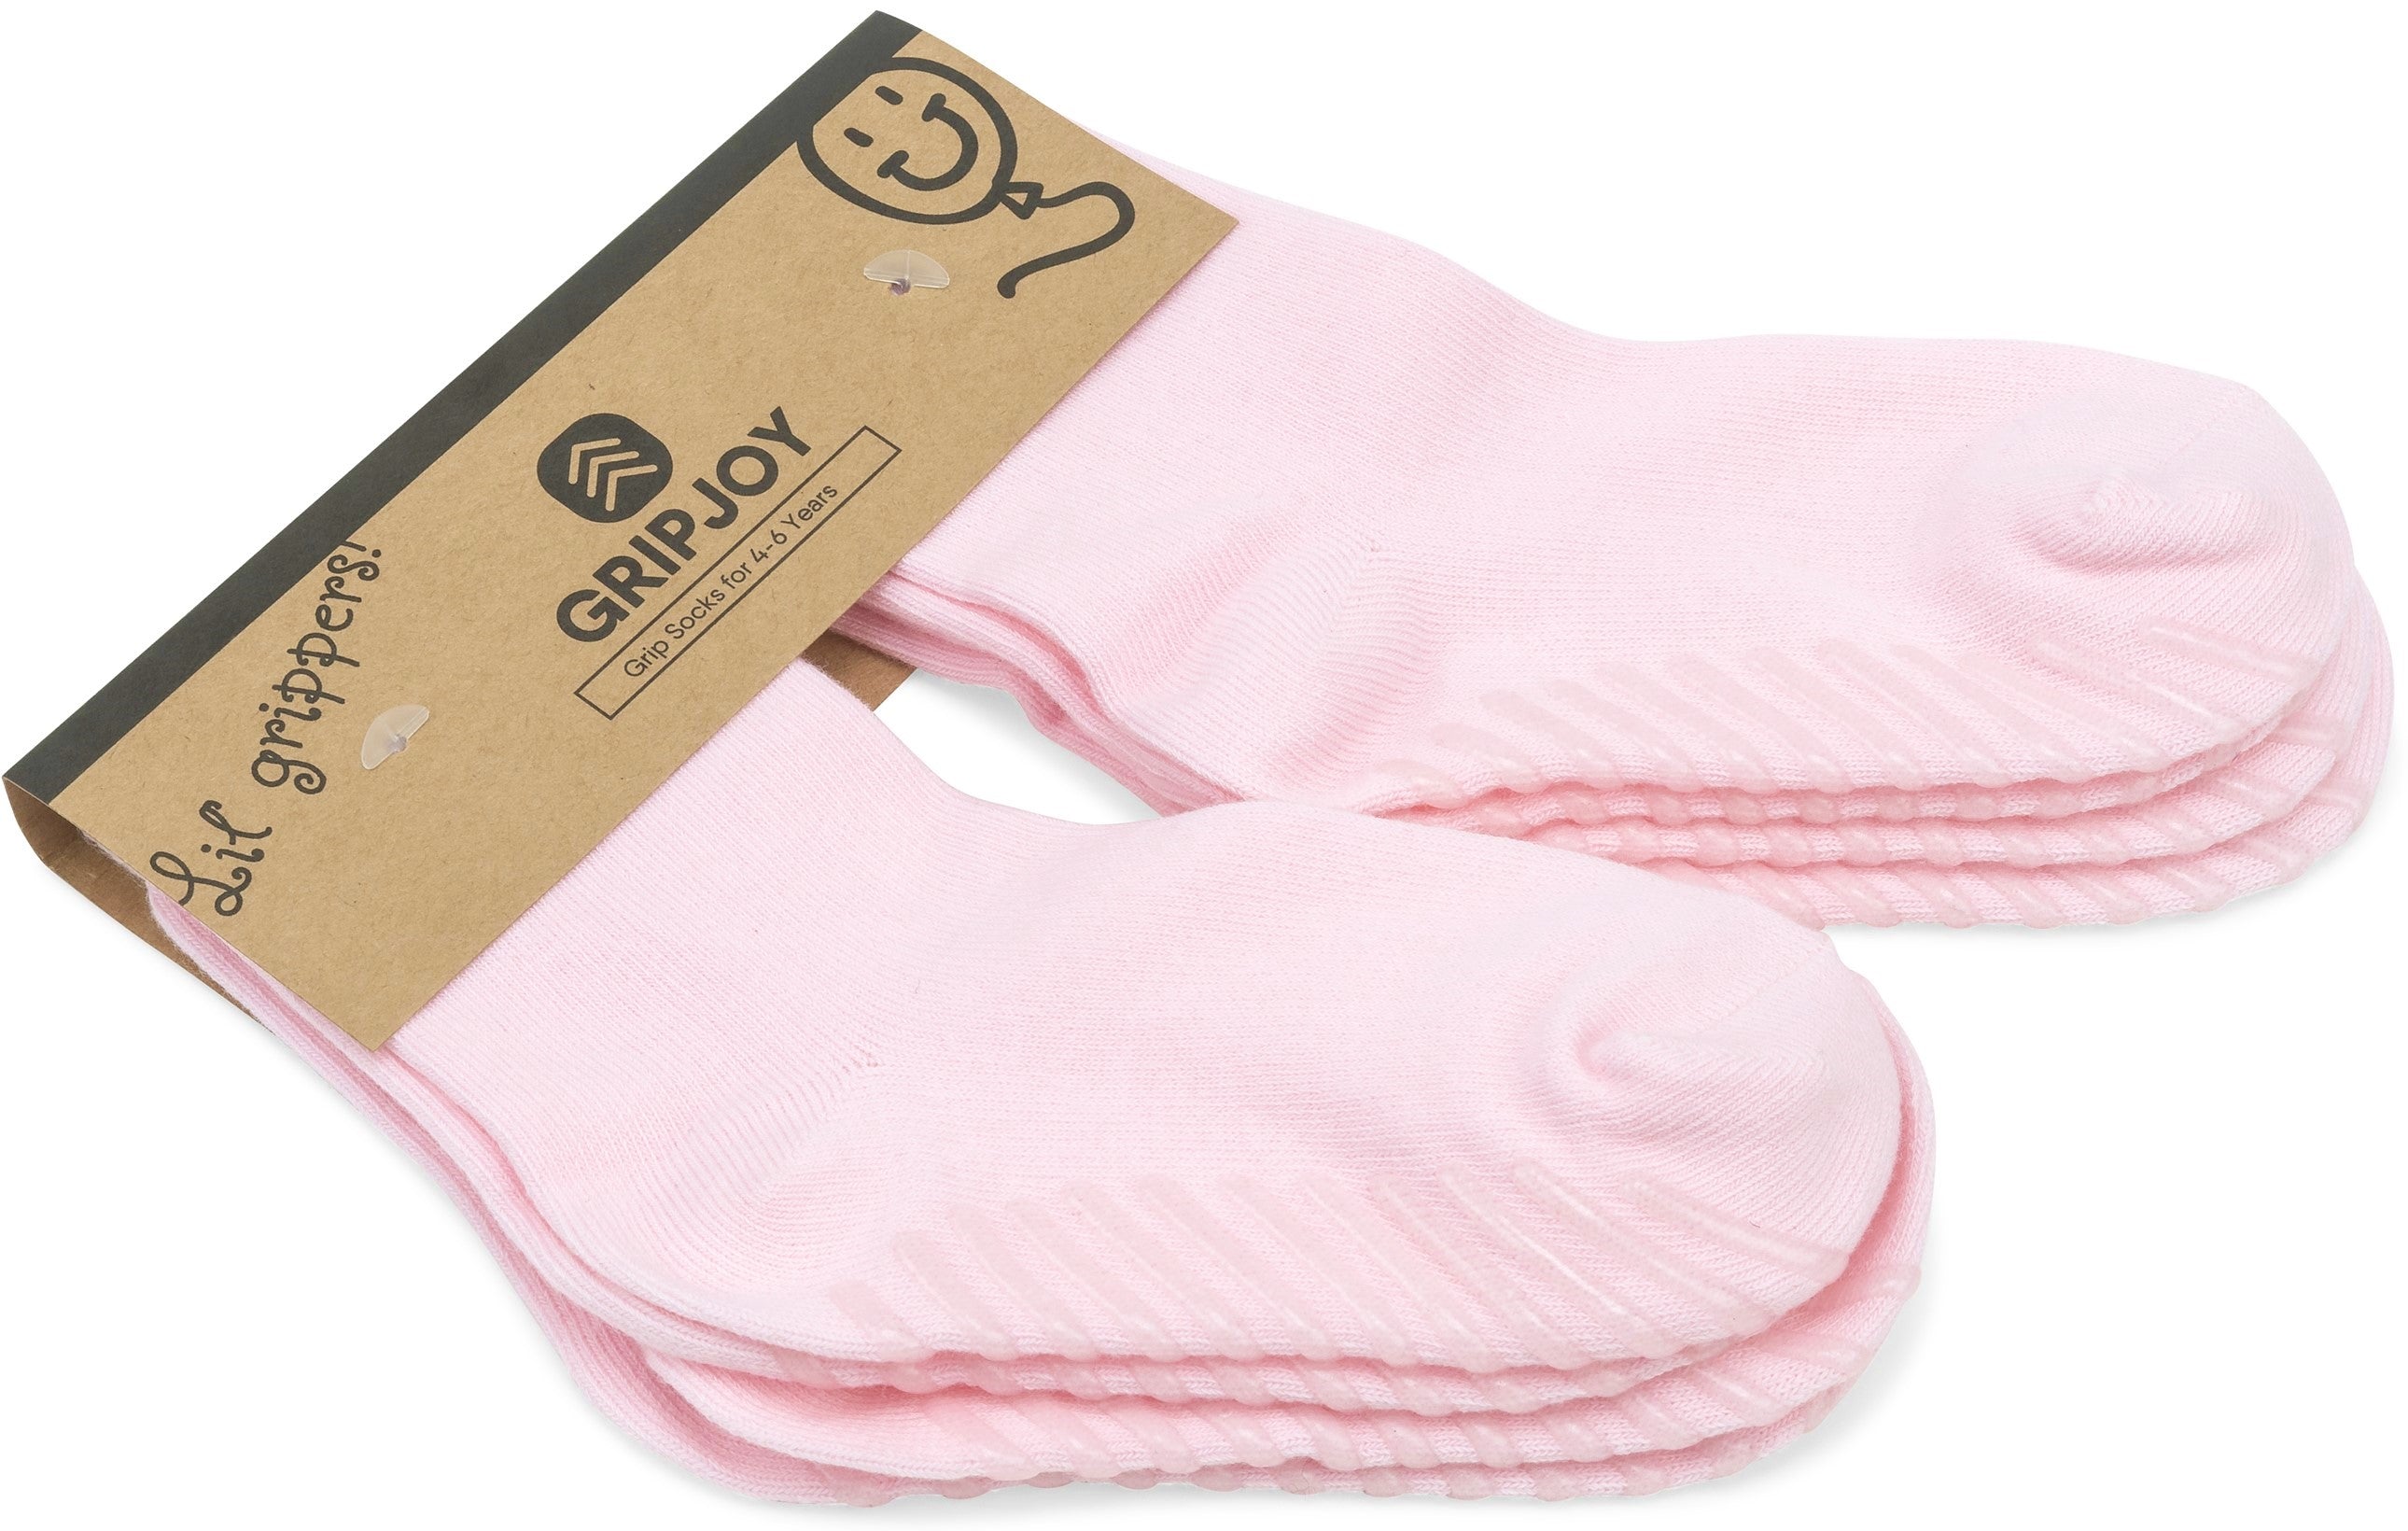 Cuteably 4 Pairs Kids Grip Socks Pack of 4 (Colors & Design May Vary)